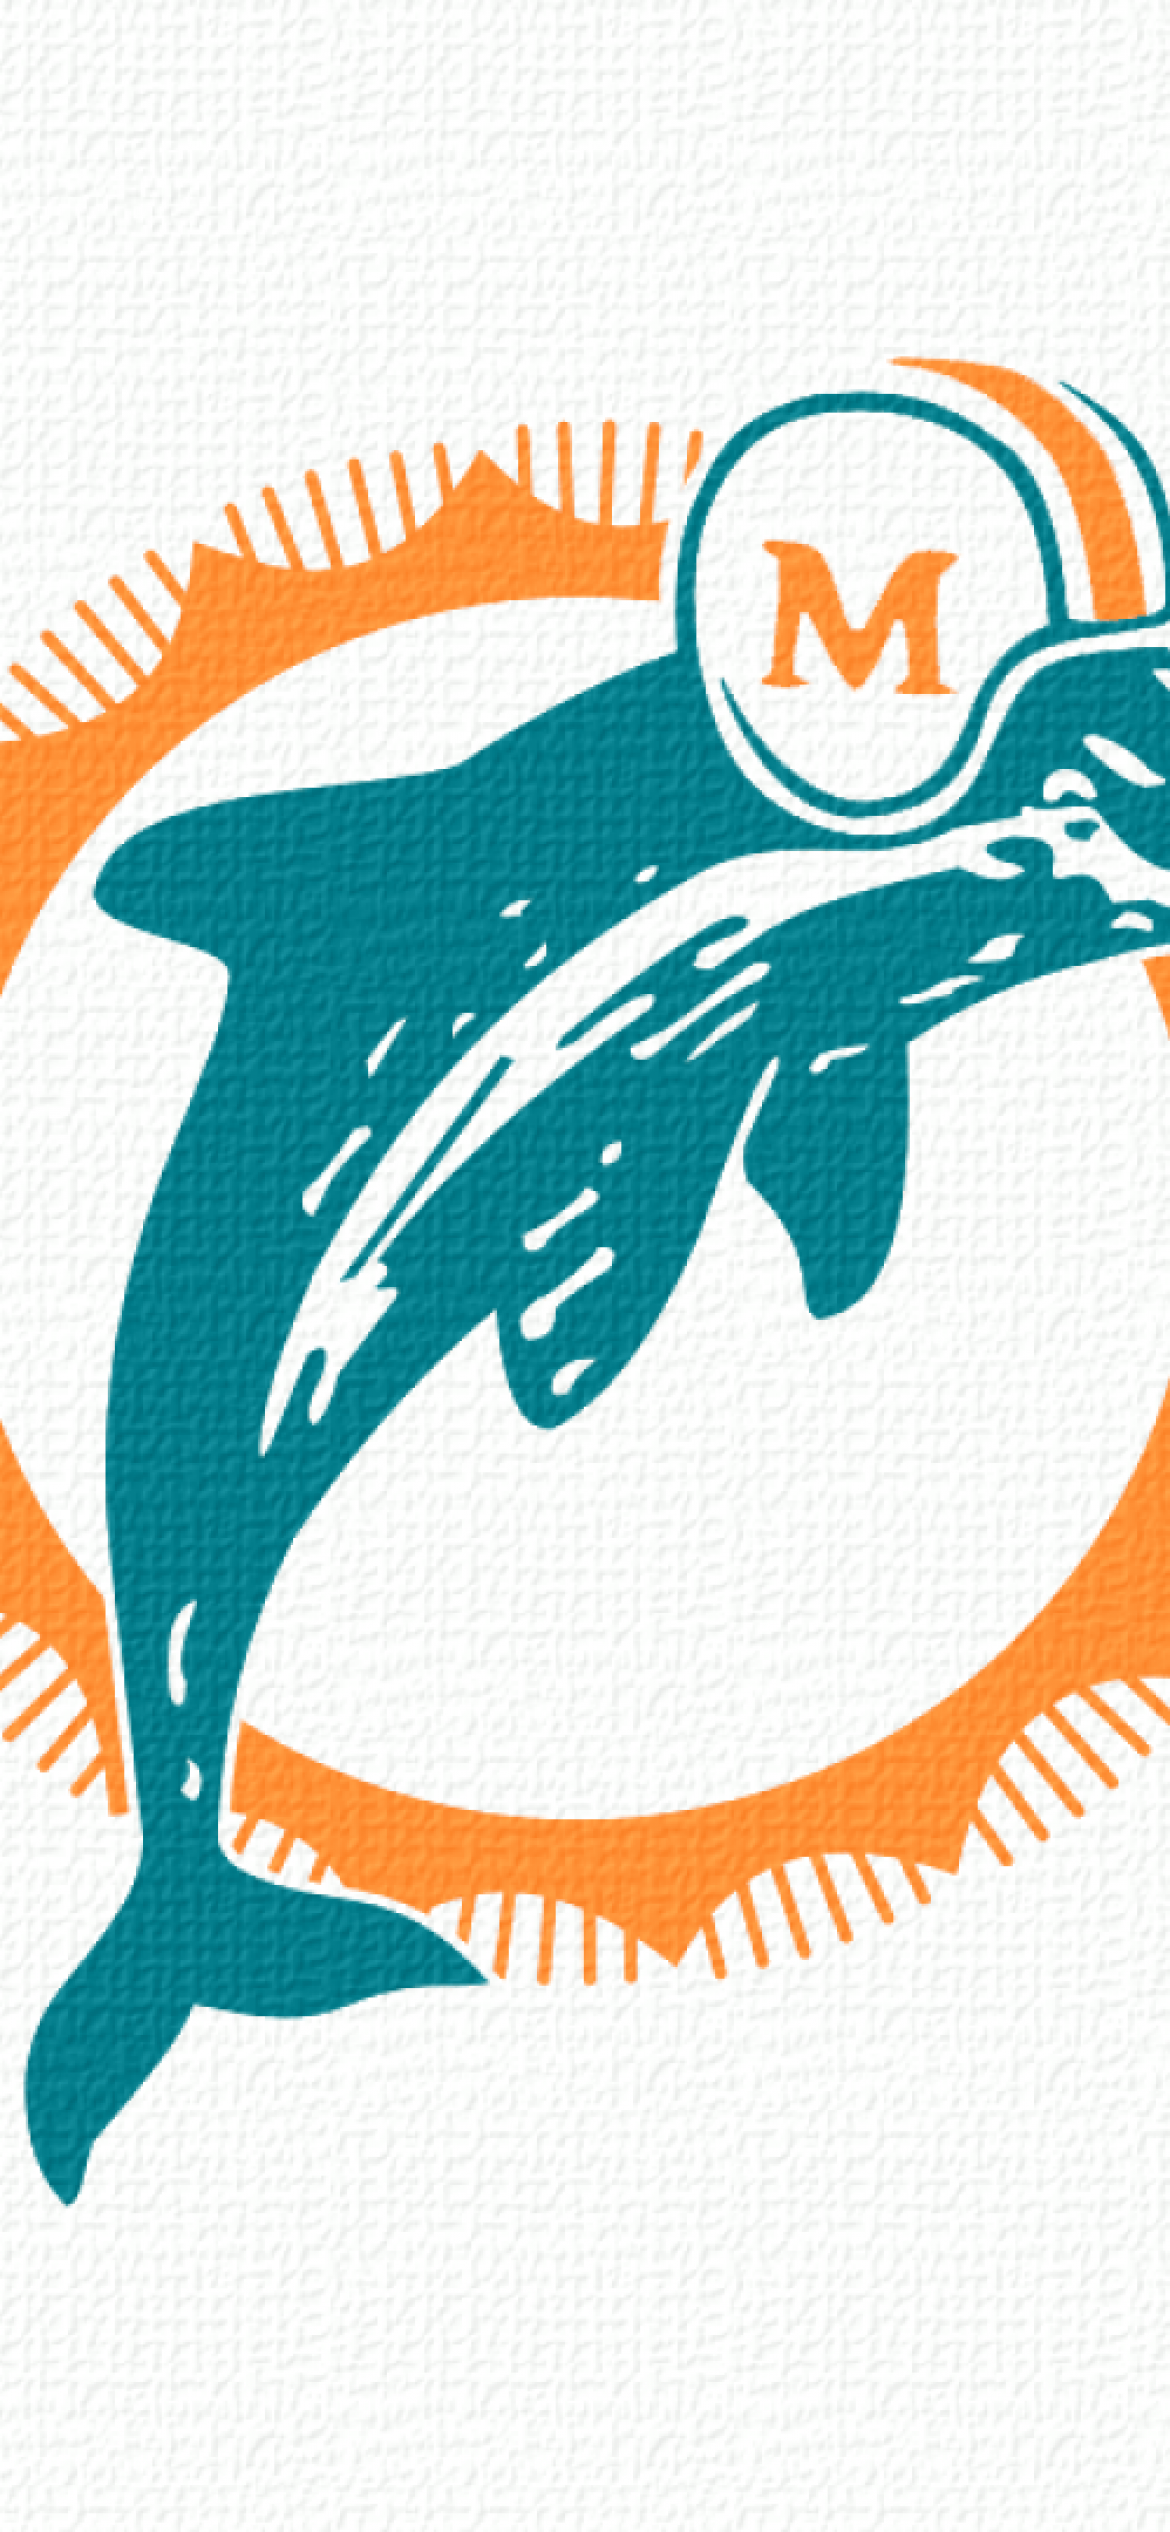 Download A Miami Dolphins iPhone lined up for fans in honor of their  winning season Wallpaper  Wallpaperscom